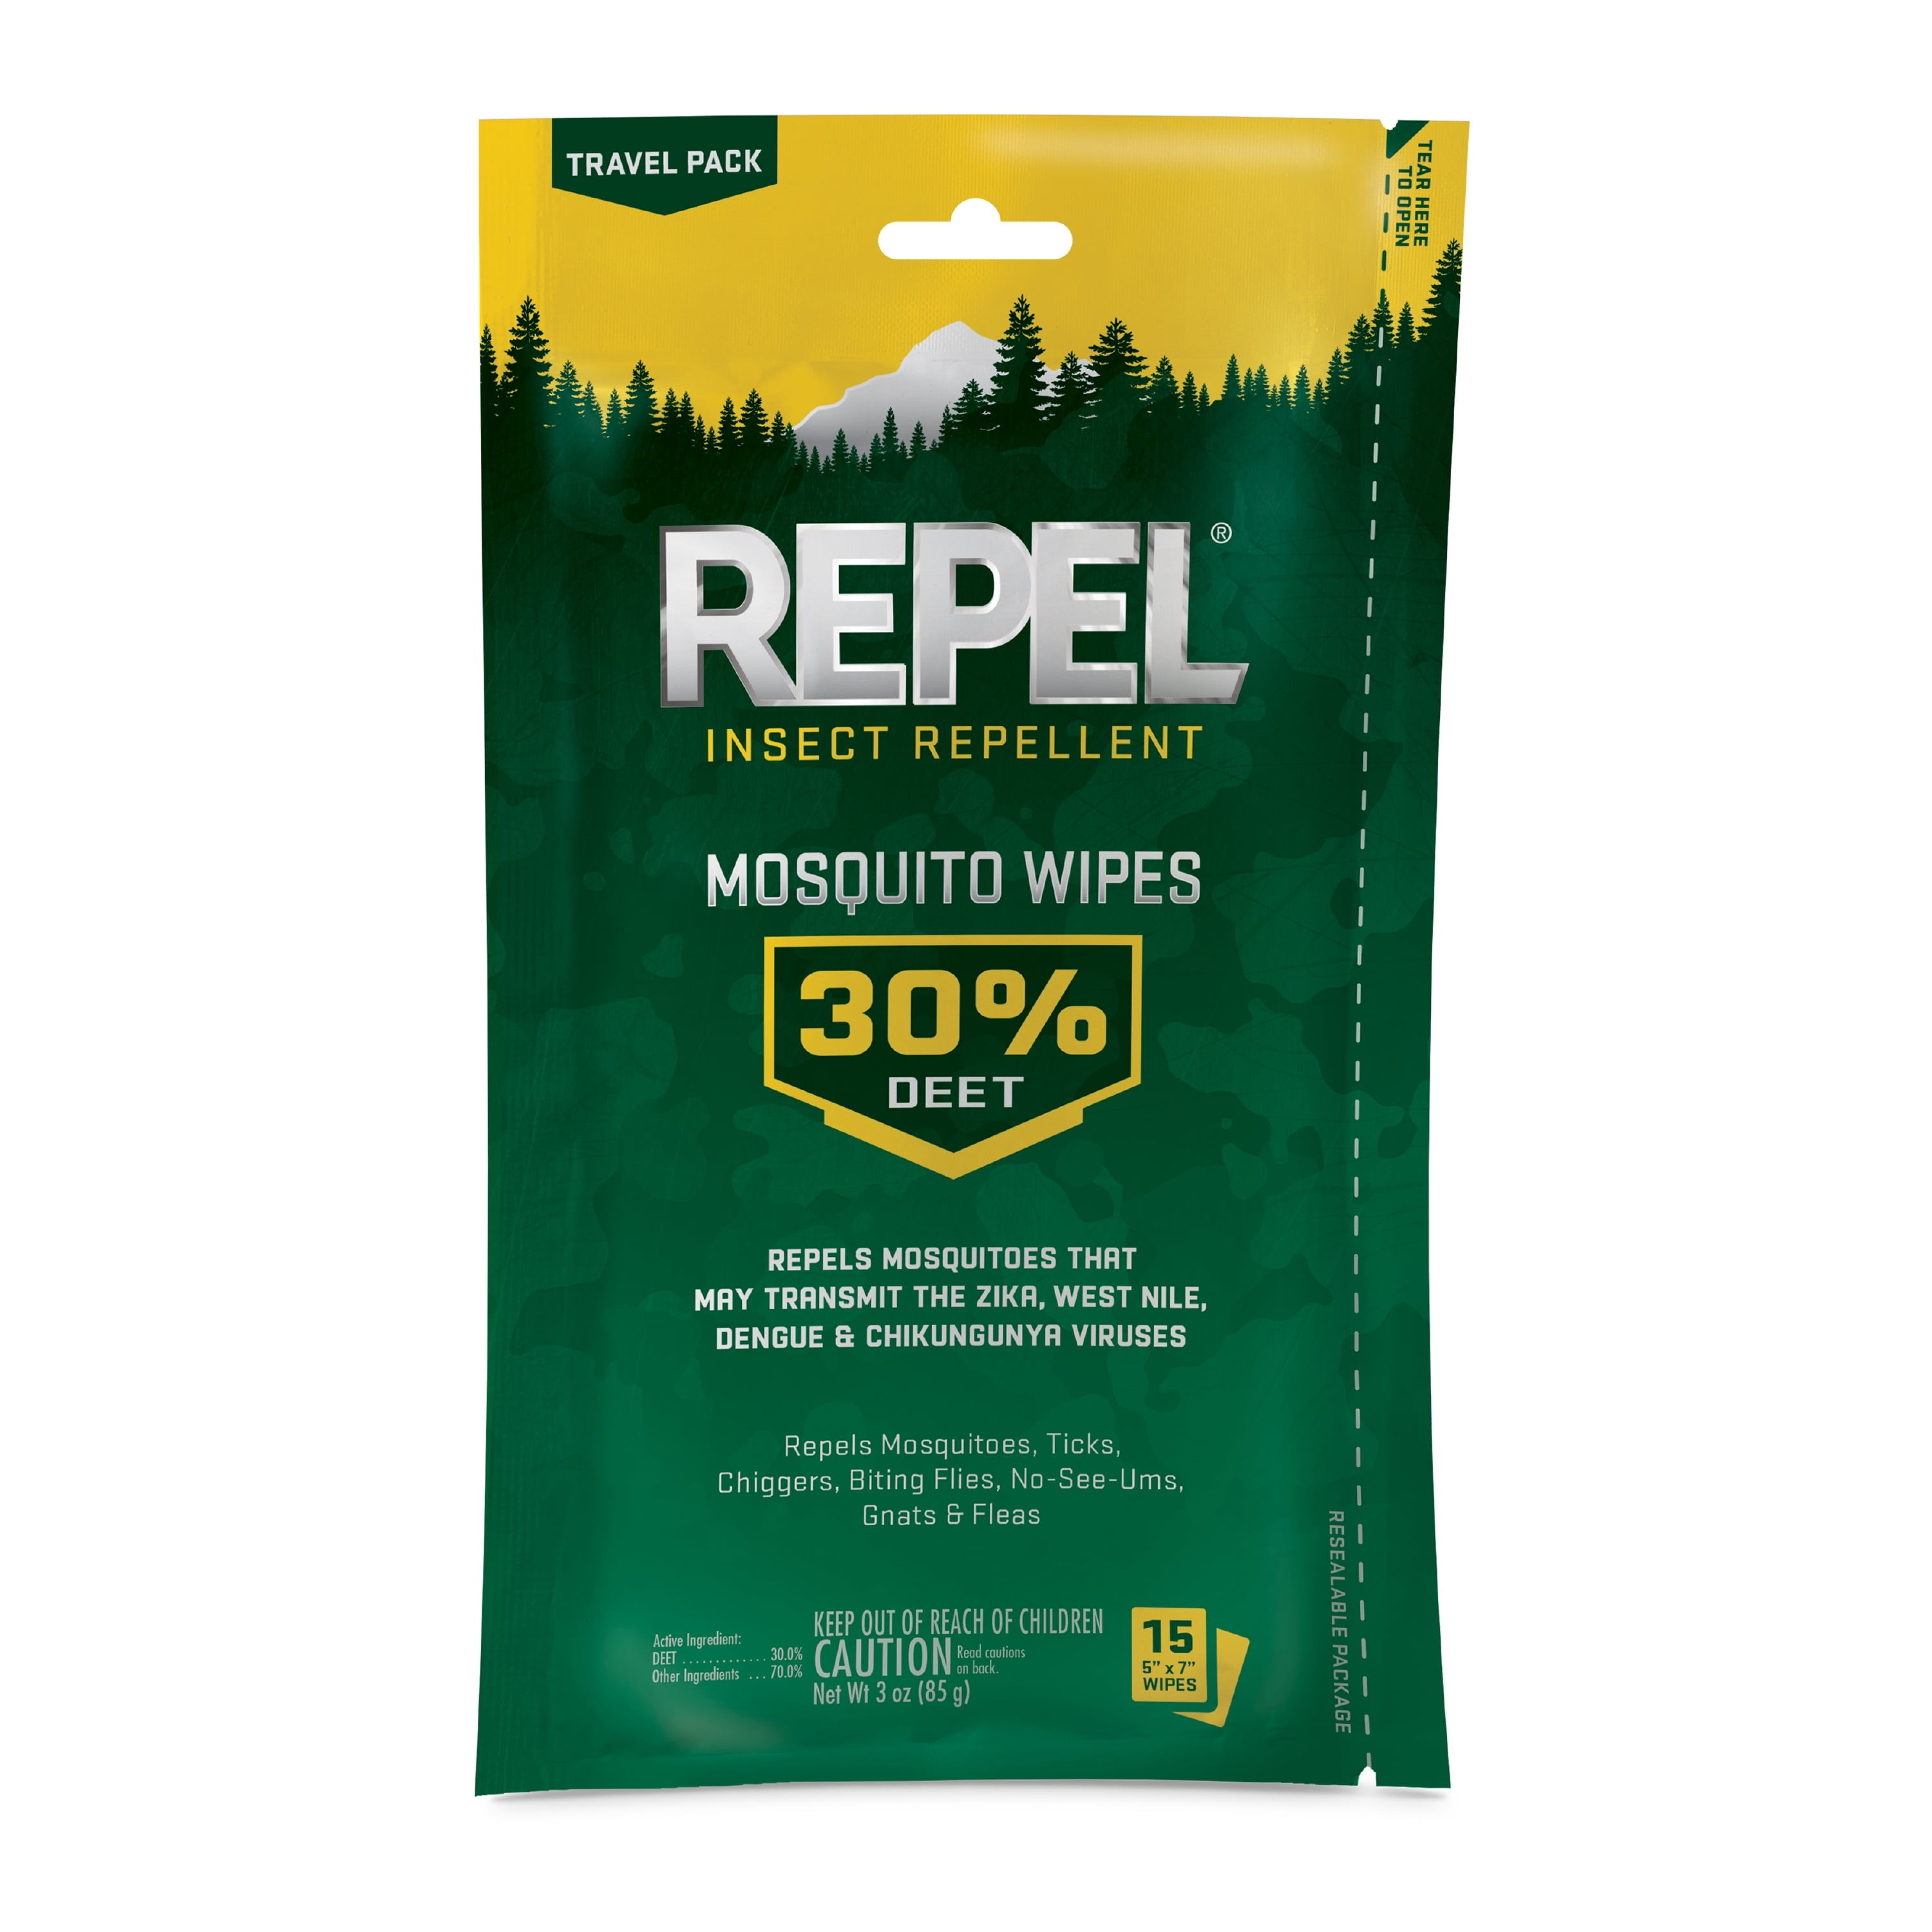 Repel Insect Repellent Mosquito Wipes 30% DEET Unscented 15-Count Ticks 2-Pack 